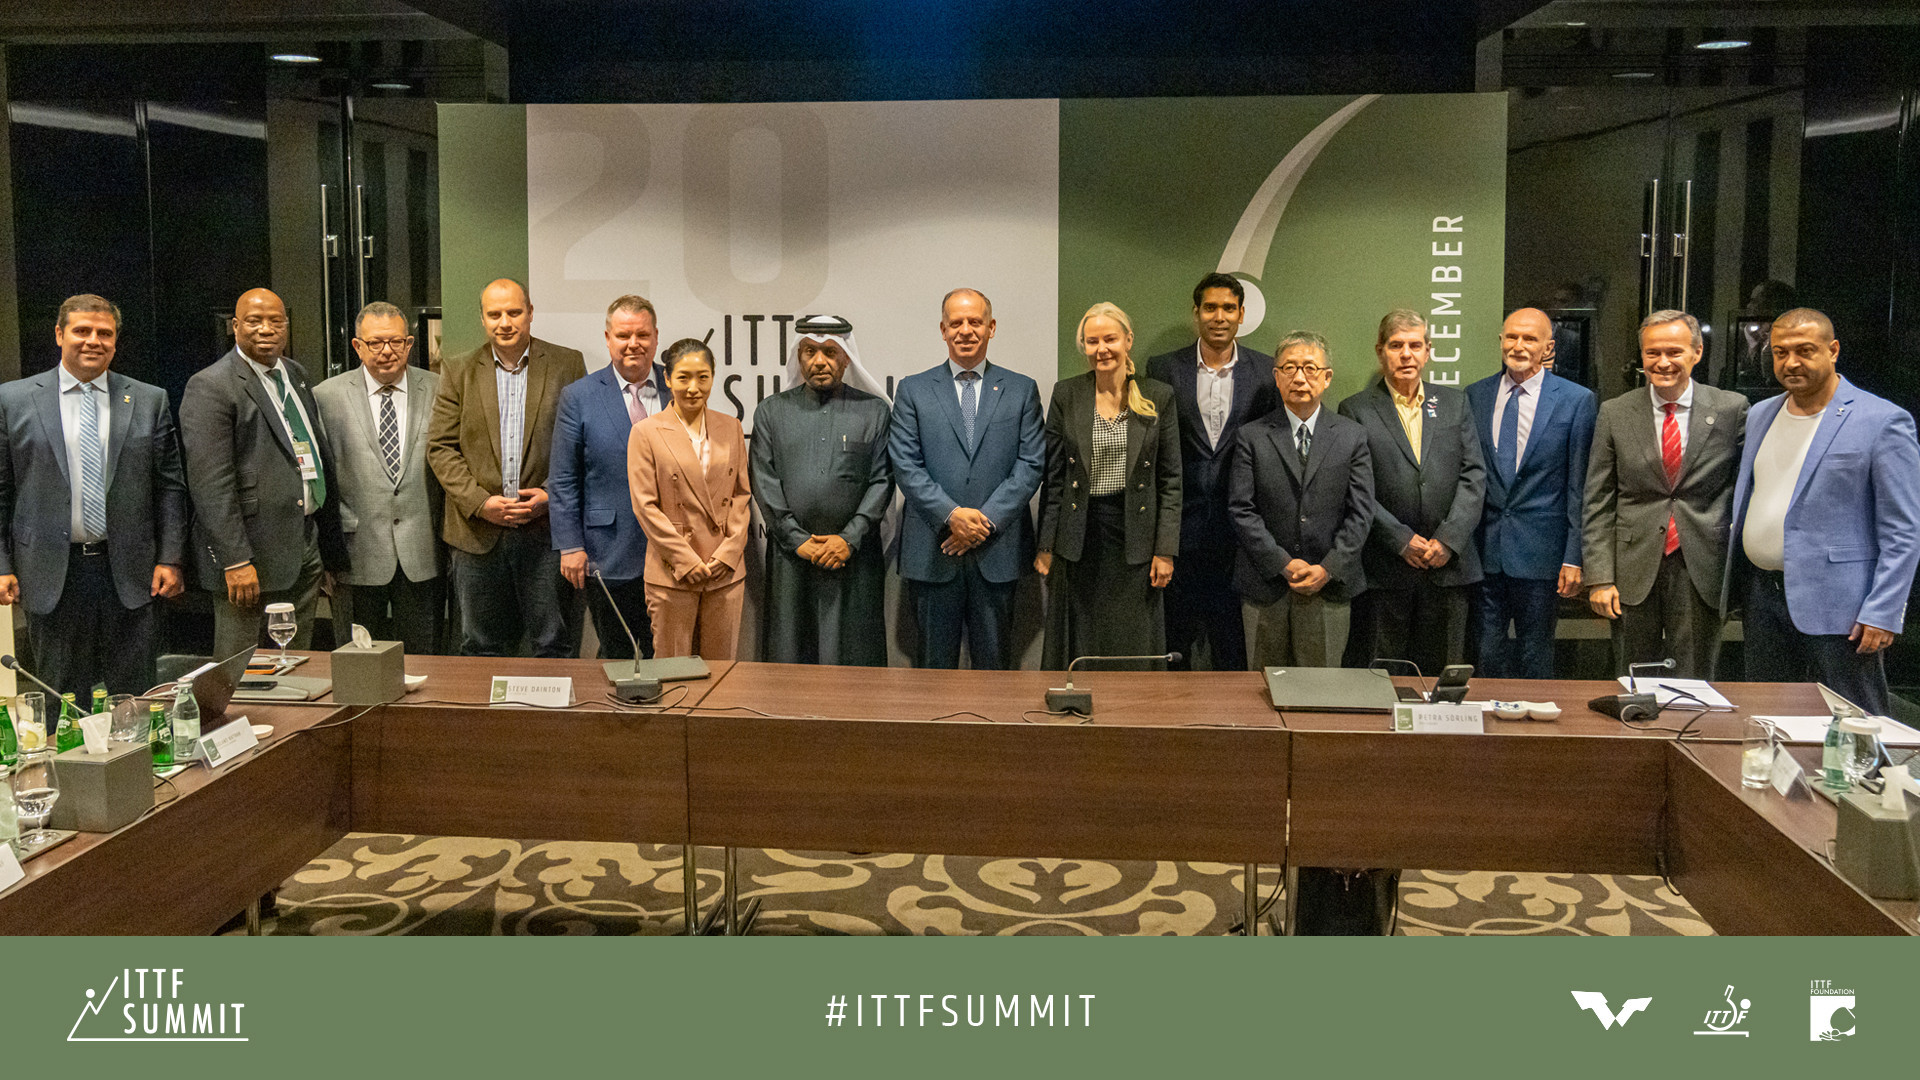 The ITTF Executive Committee has met in Amman before the Summit ©ITTF